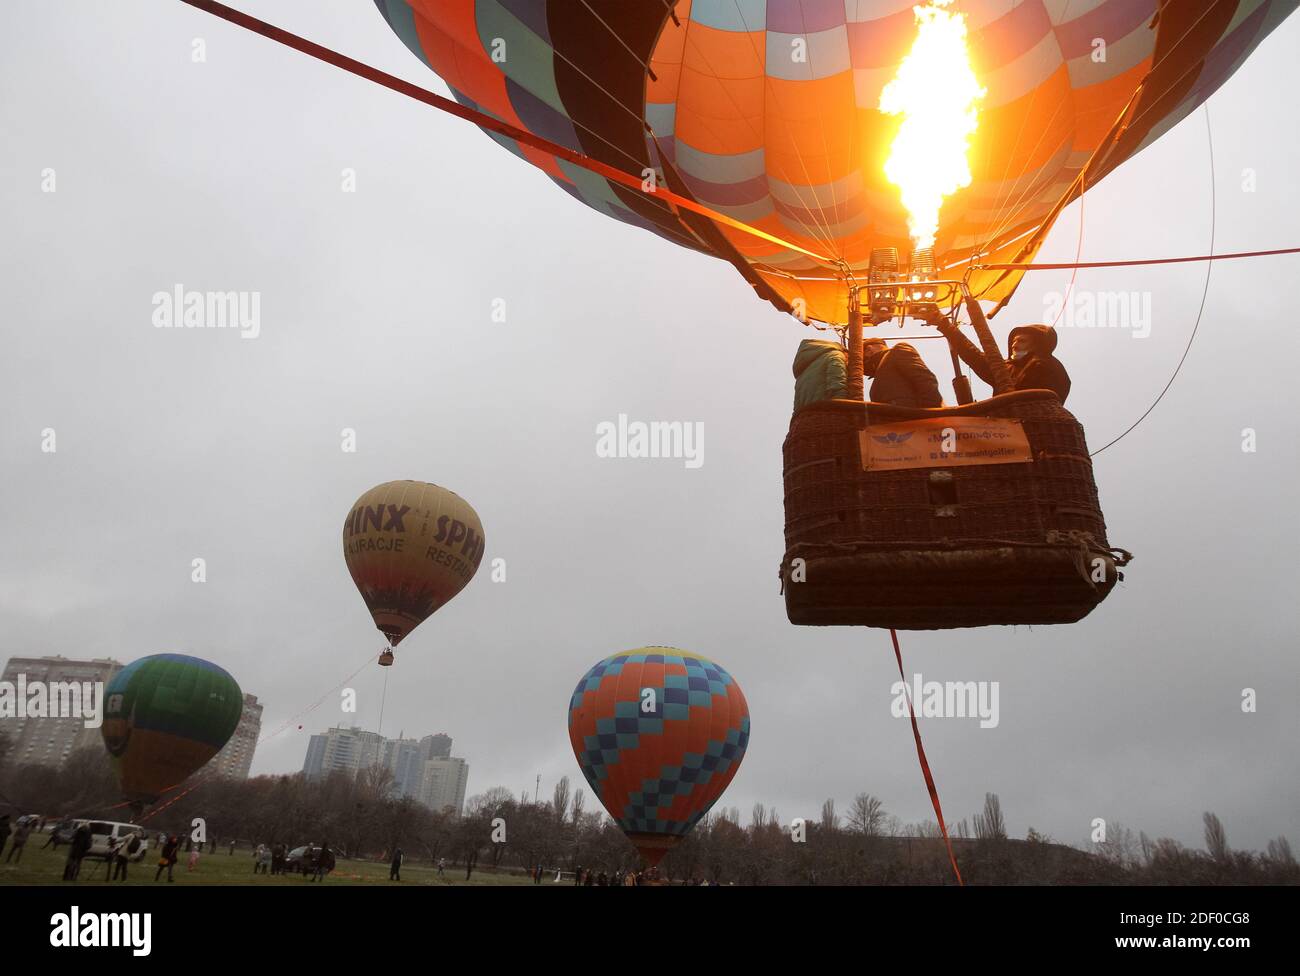 Hot air balloon with visitors ascending in the sky during the festival.The  Hot Air Balloon Festival is organized by the Hot Air Balloon Society and  the Ukrainian Aeronautical Society, a visitor can